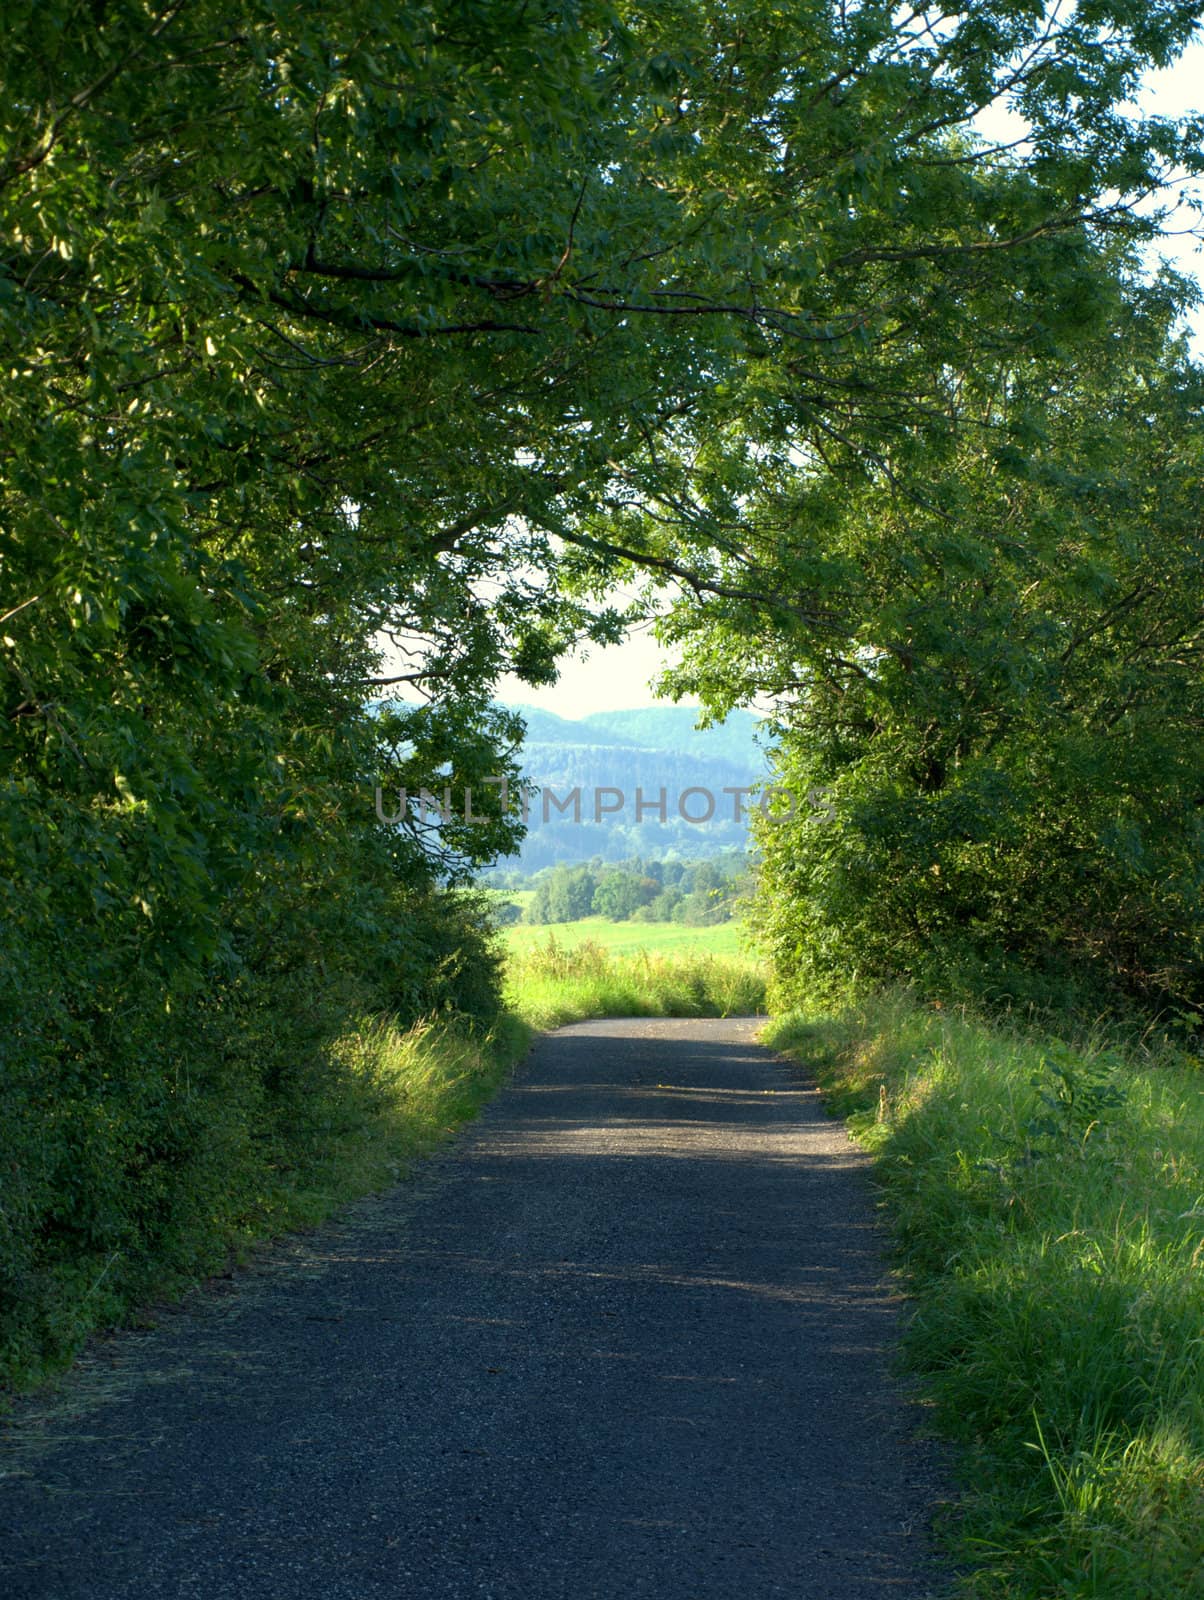 the road and green trees